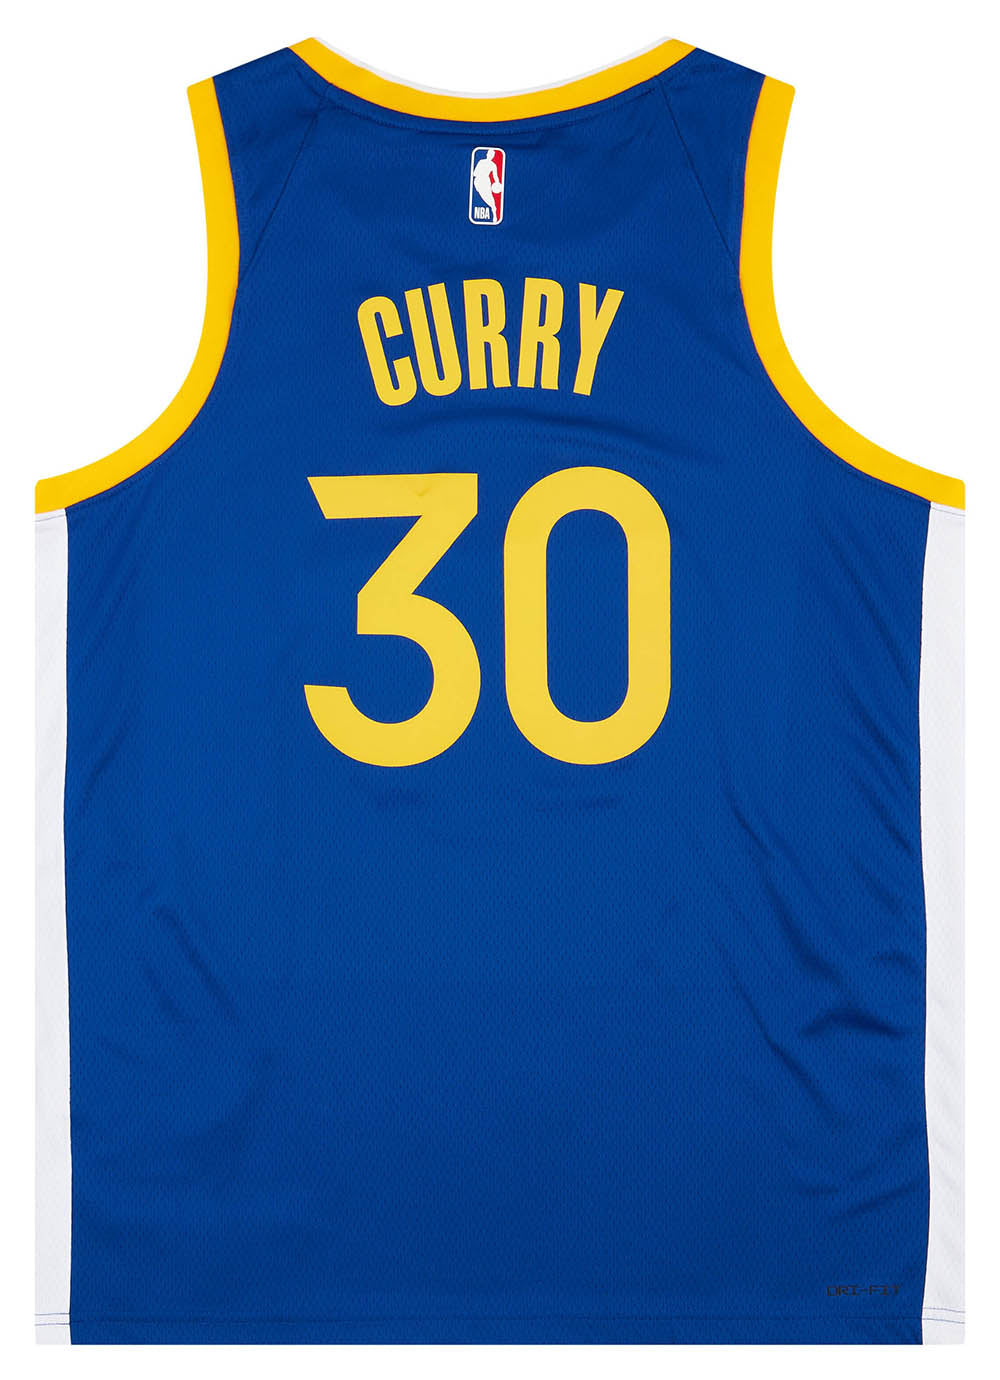 warriors old jersey